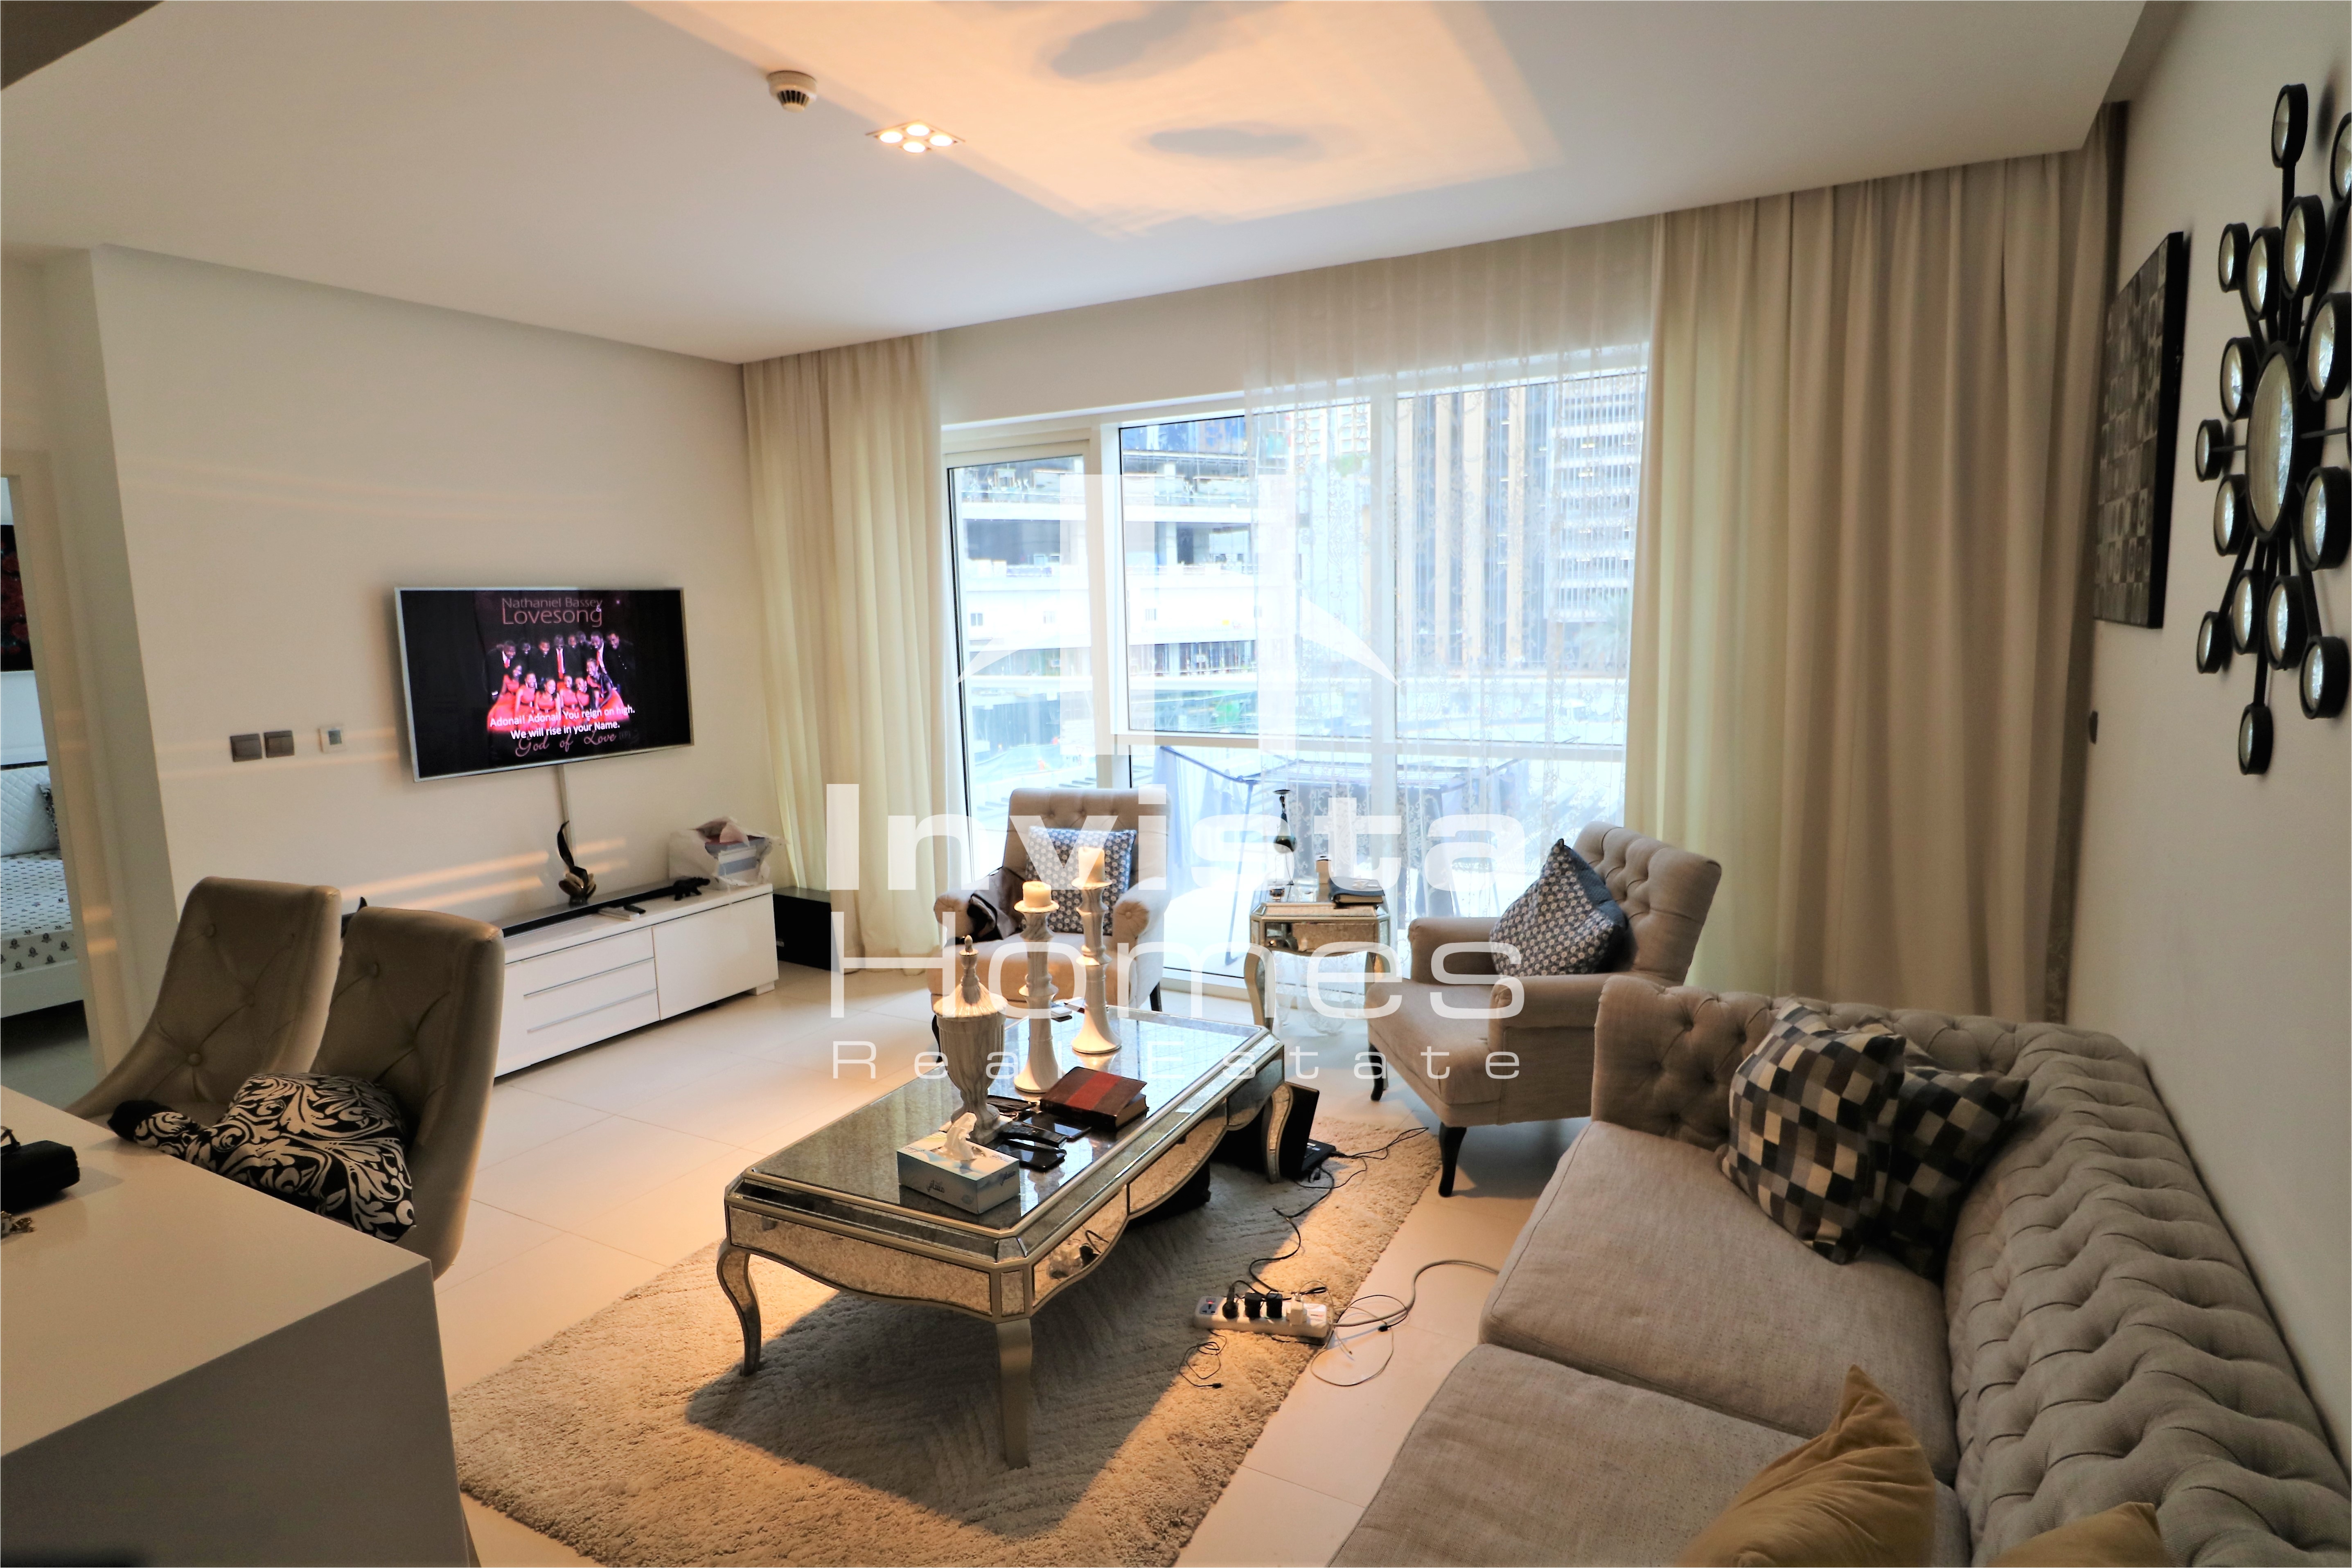 Cheapest One Bedroom Apartment In Dubai Last 7 Units Remaining Call now to View Invistahomes